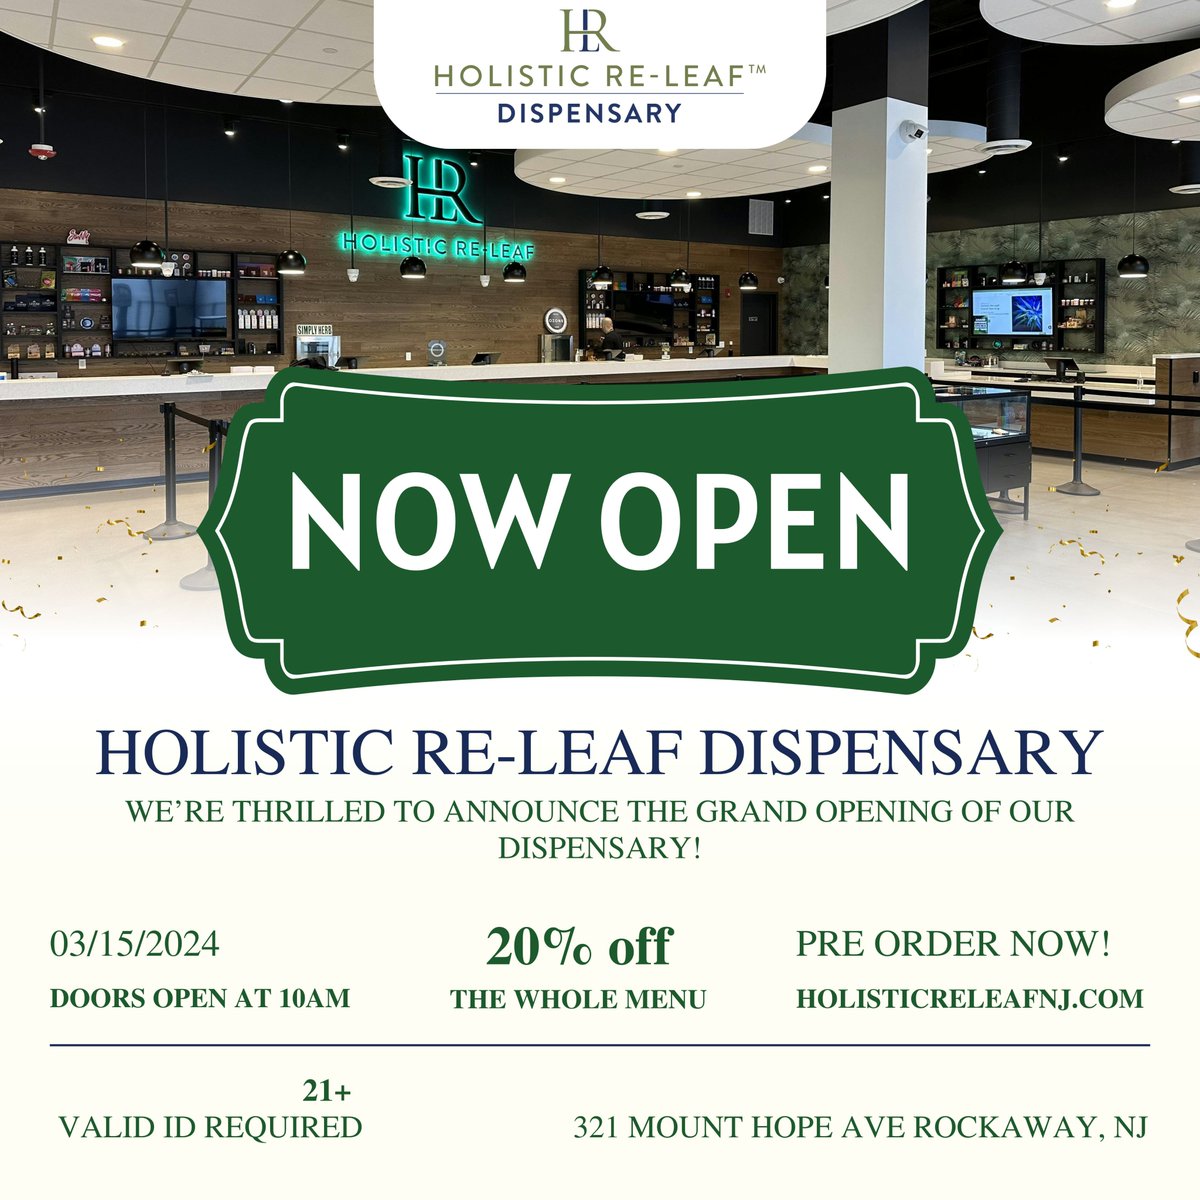 Exciting news! Holistic Re-Leaf Cannabis Dispensary is now open and ready to serve you! 
We are an adult-use dispensary opening up near the Rockaway Mall (New Jersey)!

ALSO GET 20% OFF on THE WHOLE MENU!
Doors will be open at 10 AM
21+ Adults Only

#holisticreleaf #njdispensary